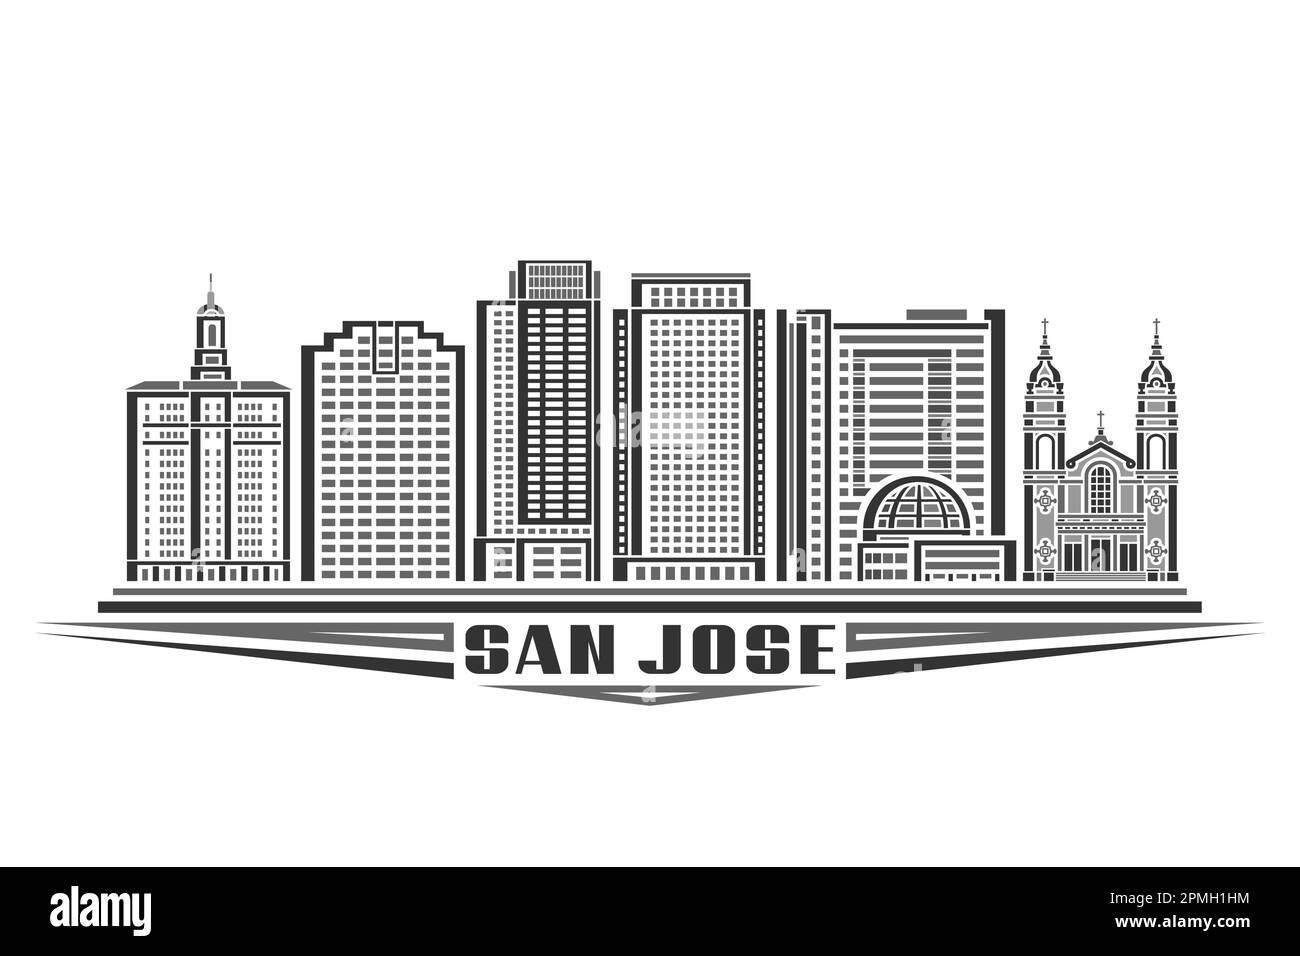 Vector illustration of San Jose, monochrome card with linear design famous californian city scape, american urban line art concept with decorative let Stock Vector